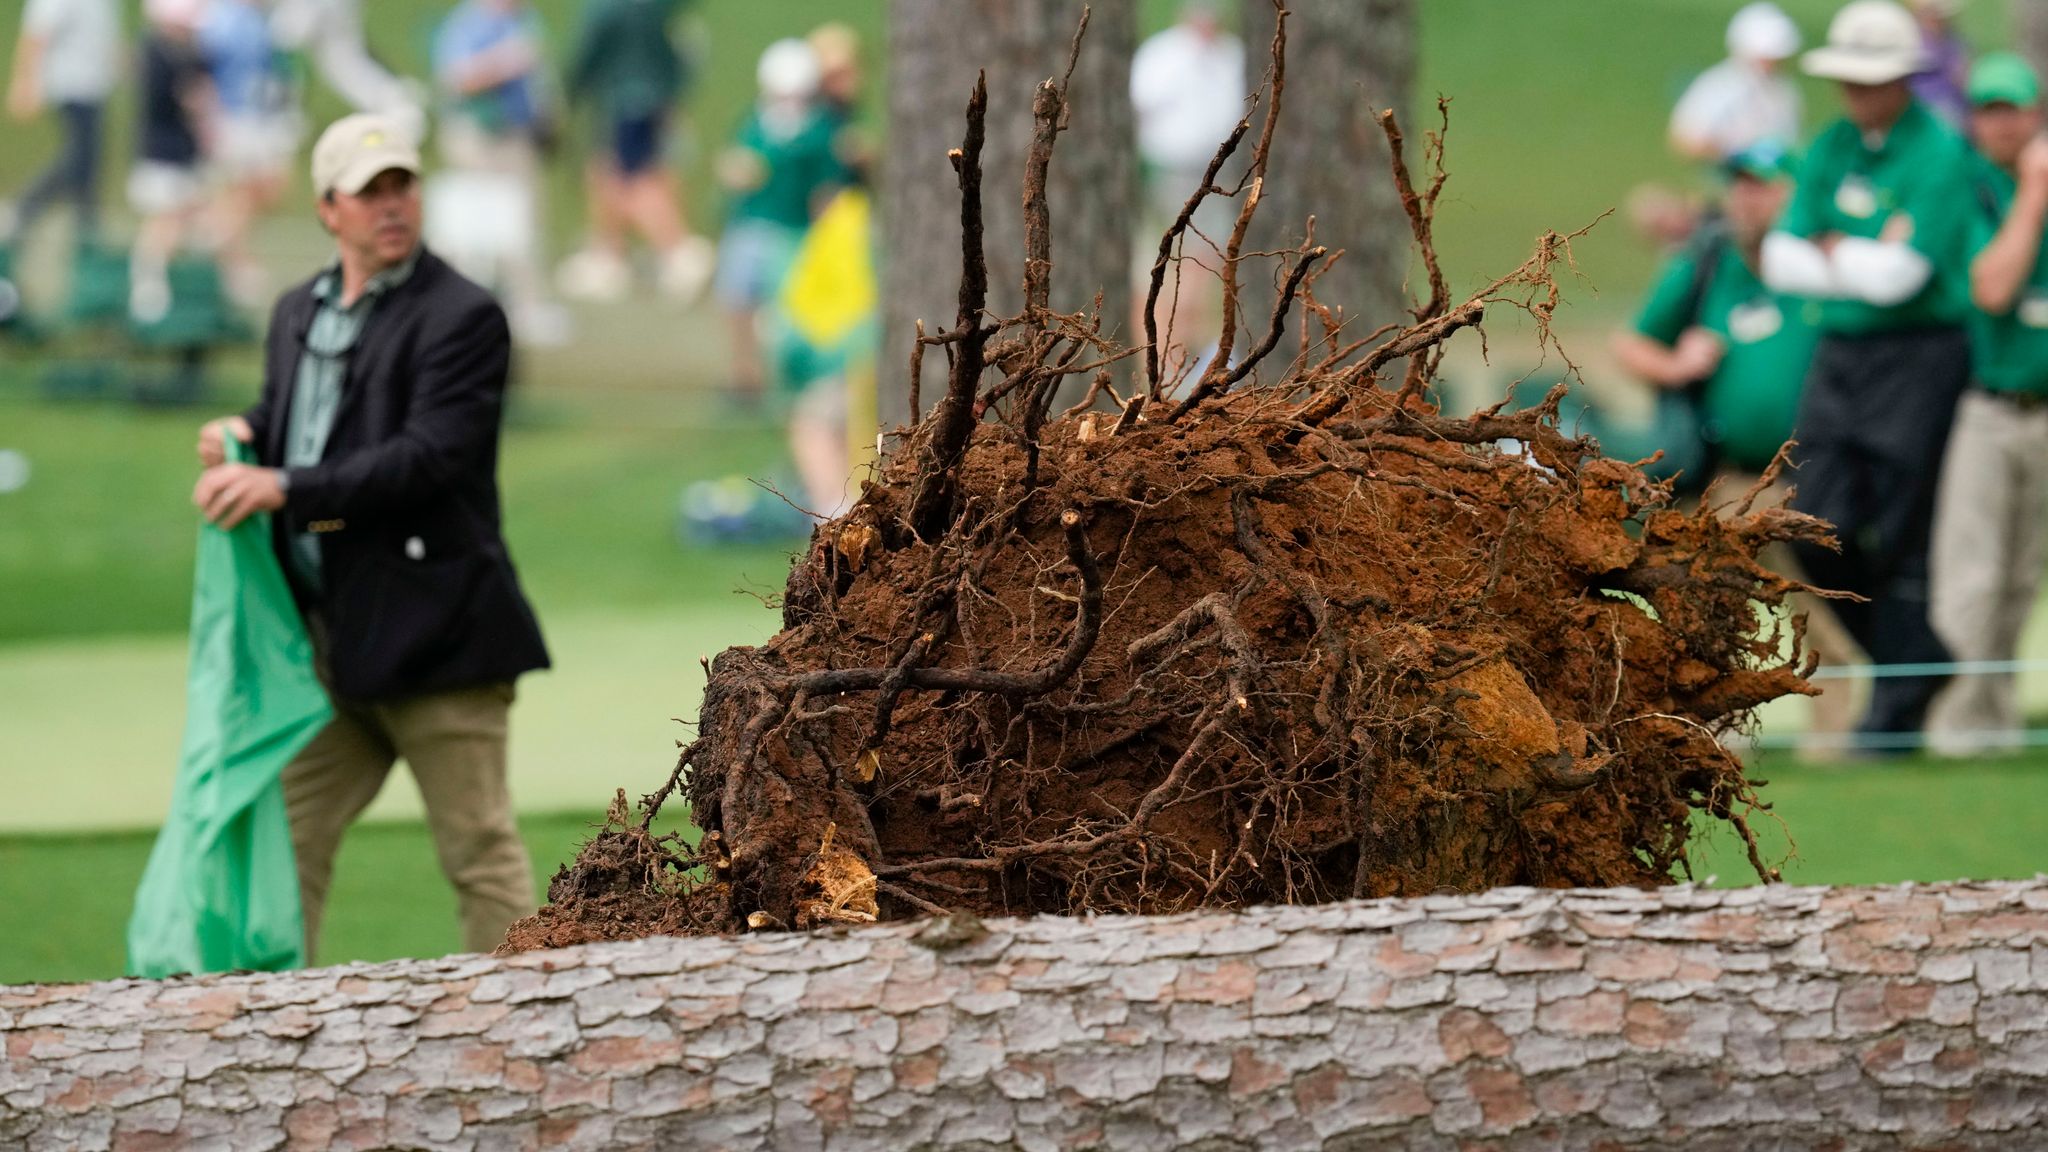 Masters Live Updates, Play suspended at Masters for the day